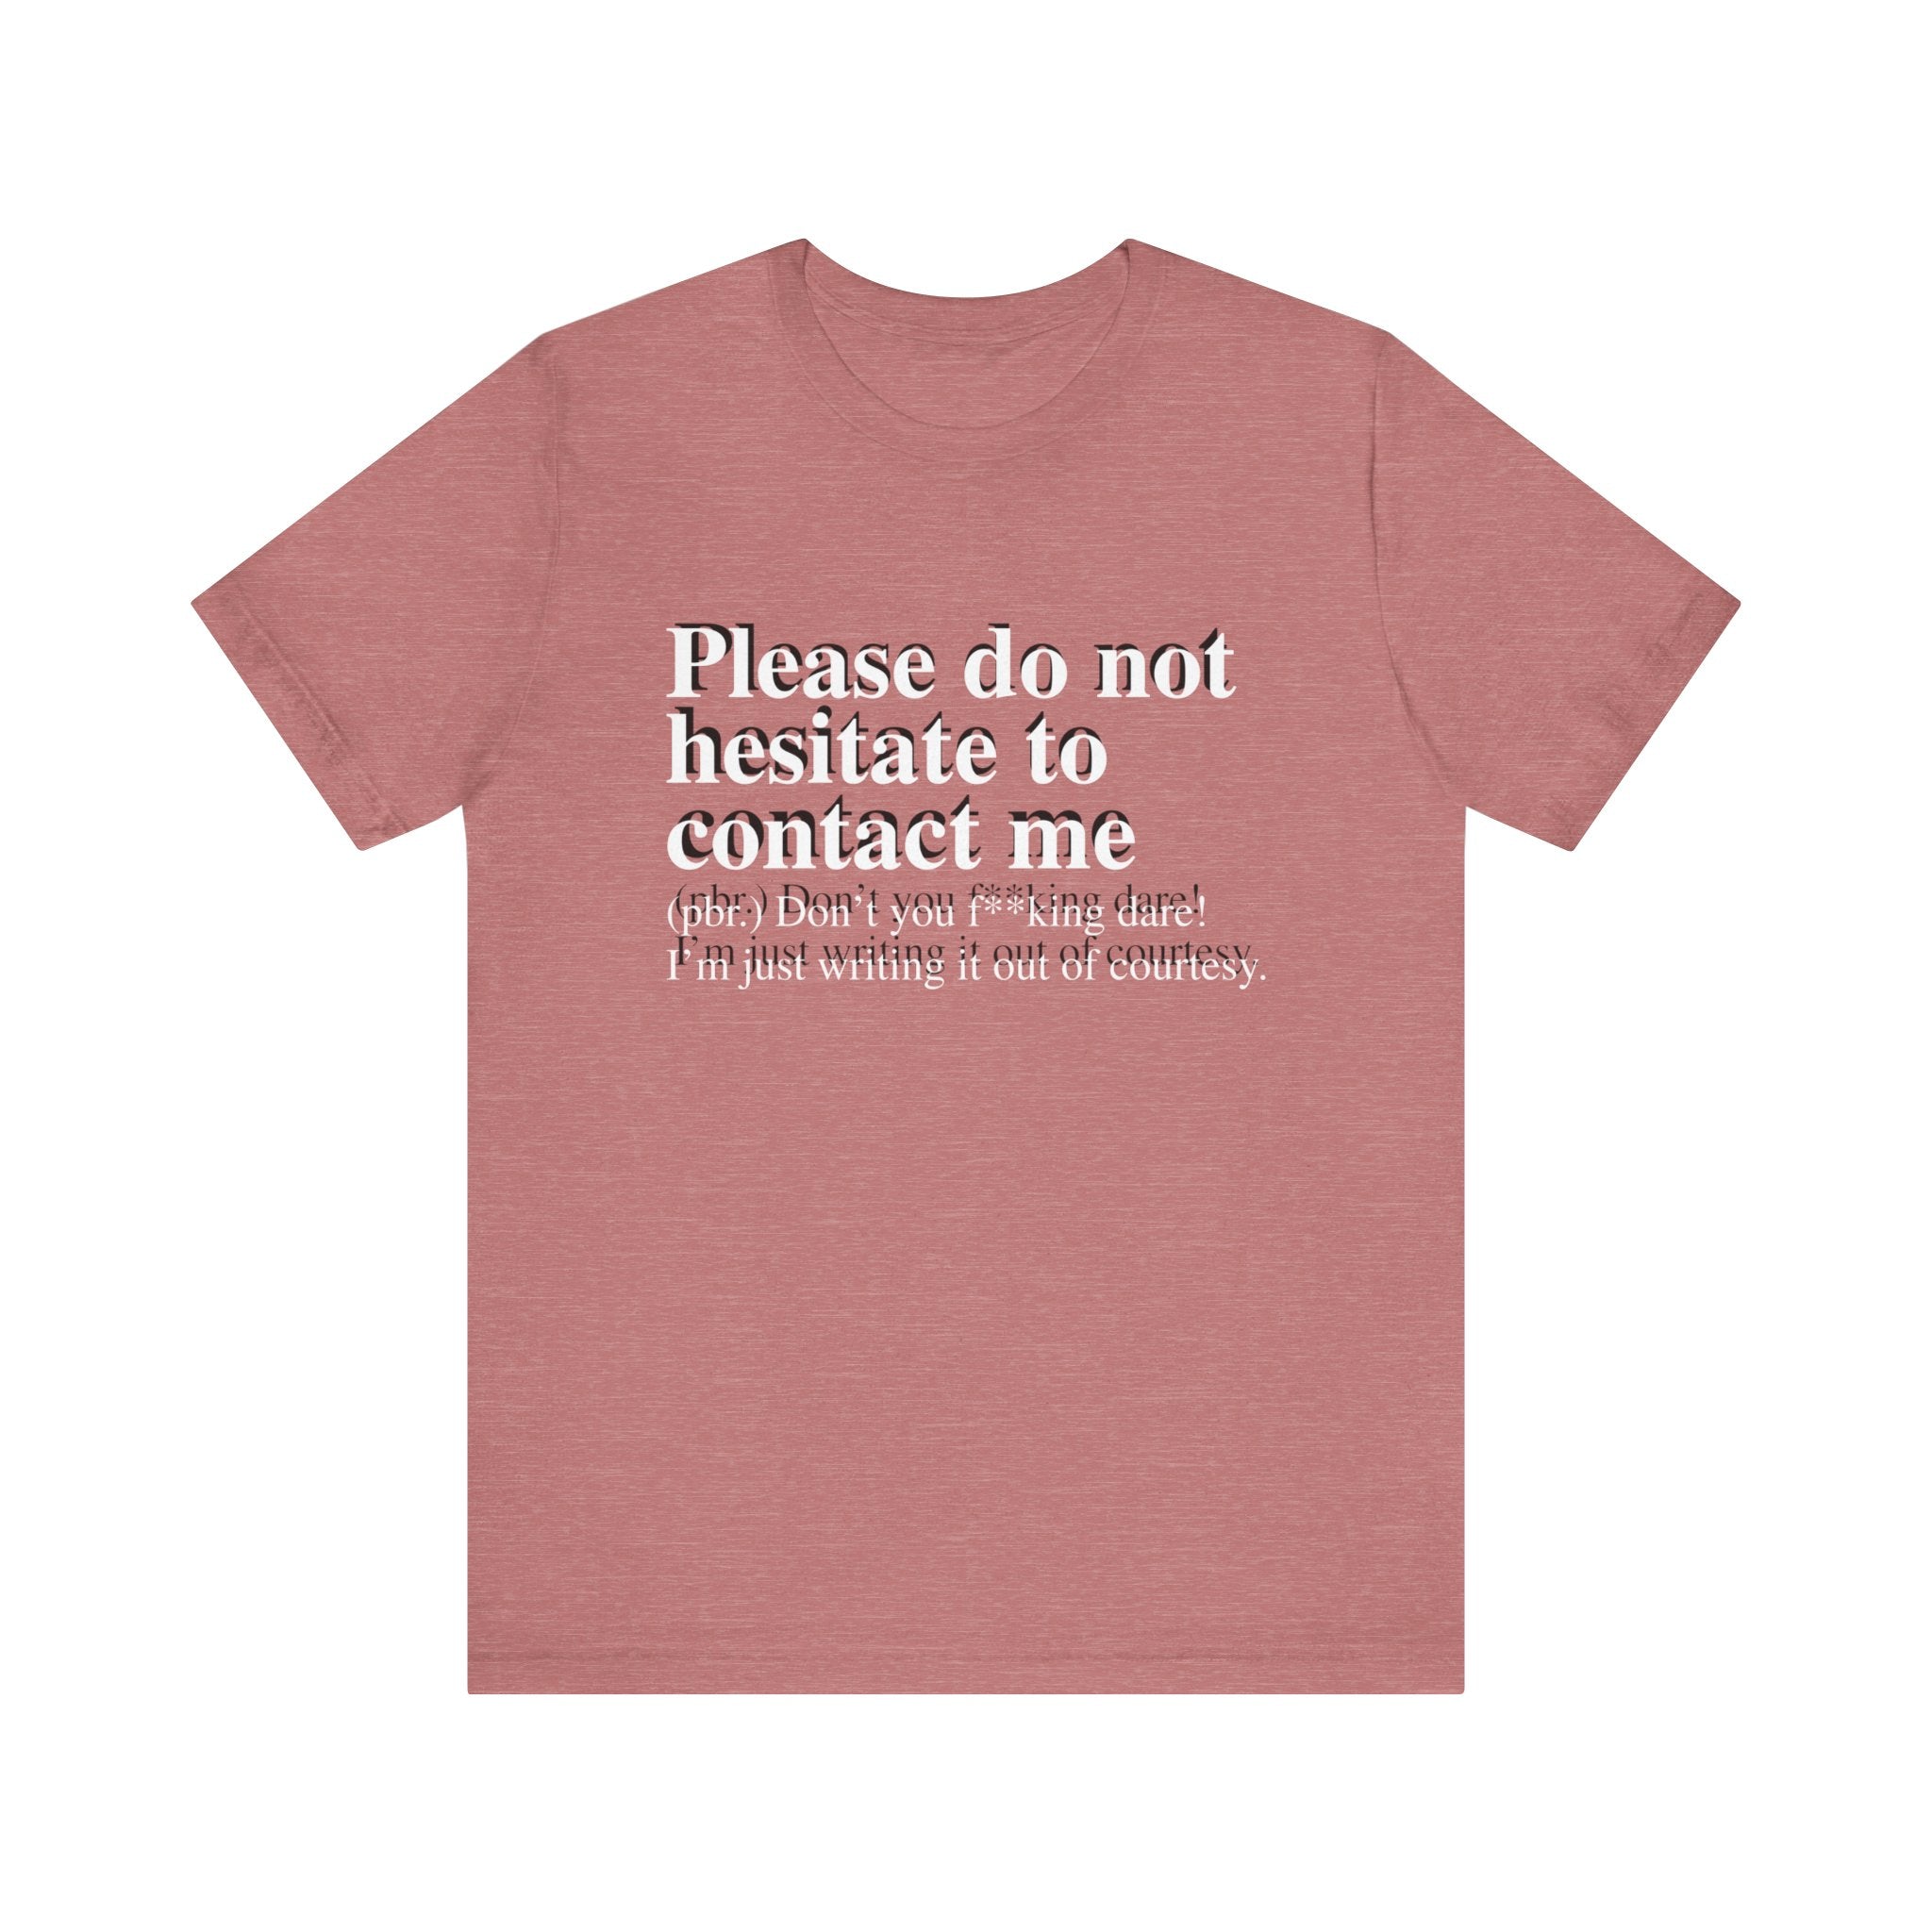 A heather red unisex jersey tee with text that reads, "Please Do Not Hesitate to Contact Me" (pfft, don't you even dare! I'm just writing it out of courtesy).